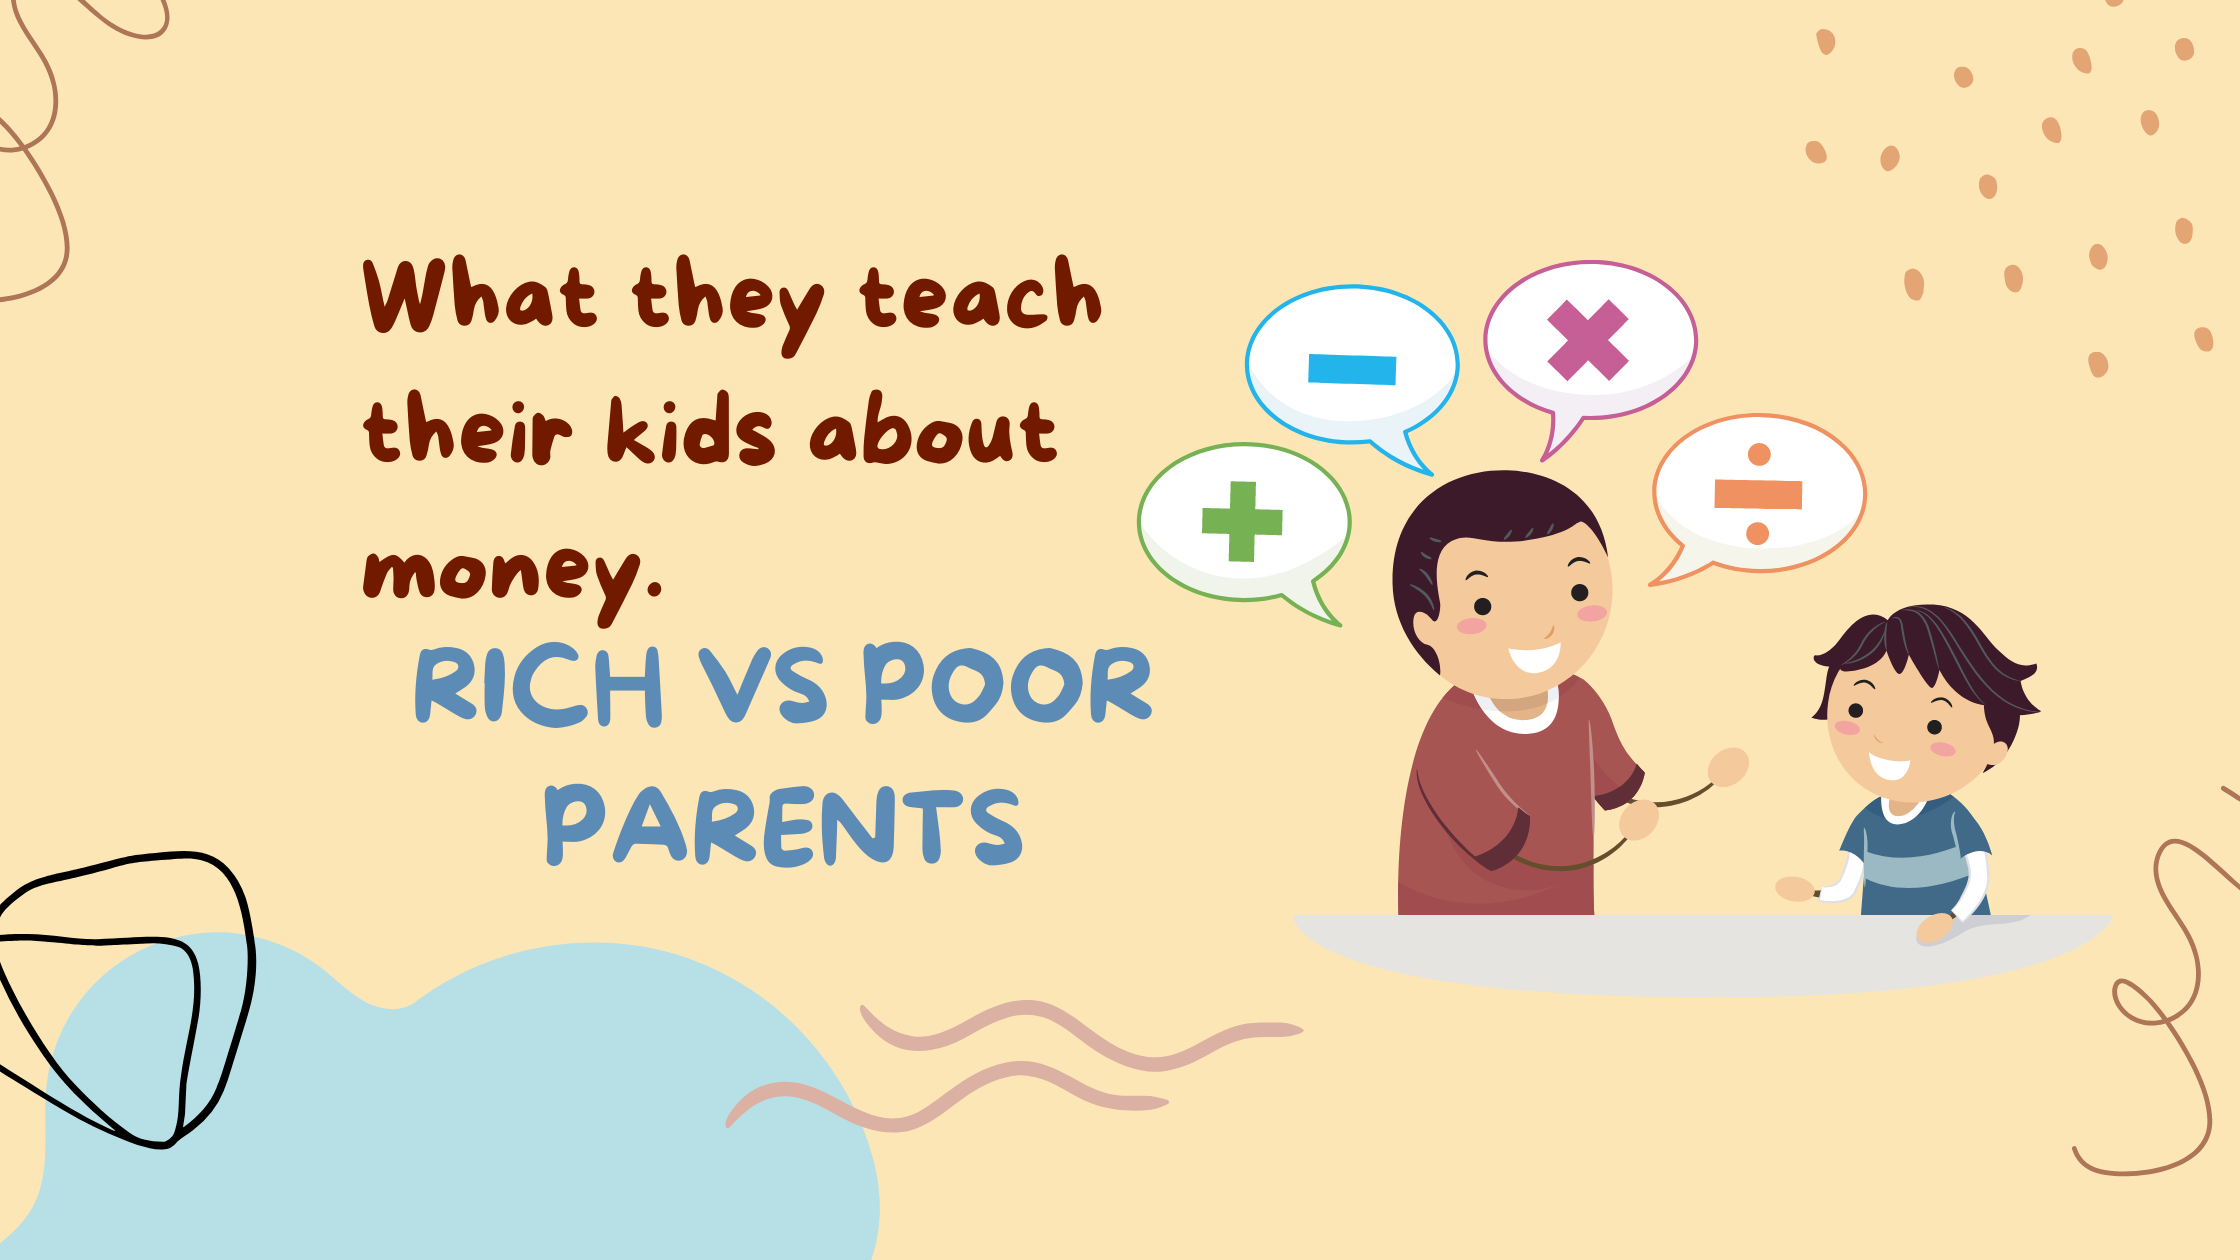 Rich Parents vs Poor Parents: What They Teach Their Kids About Money